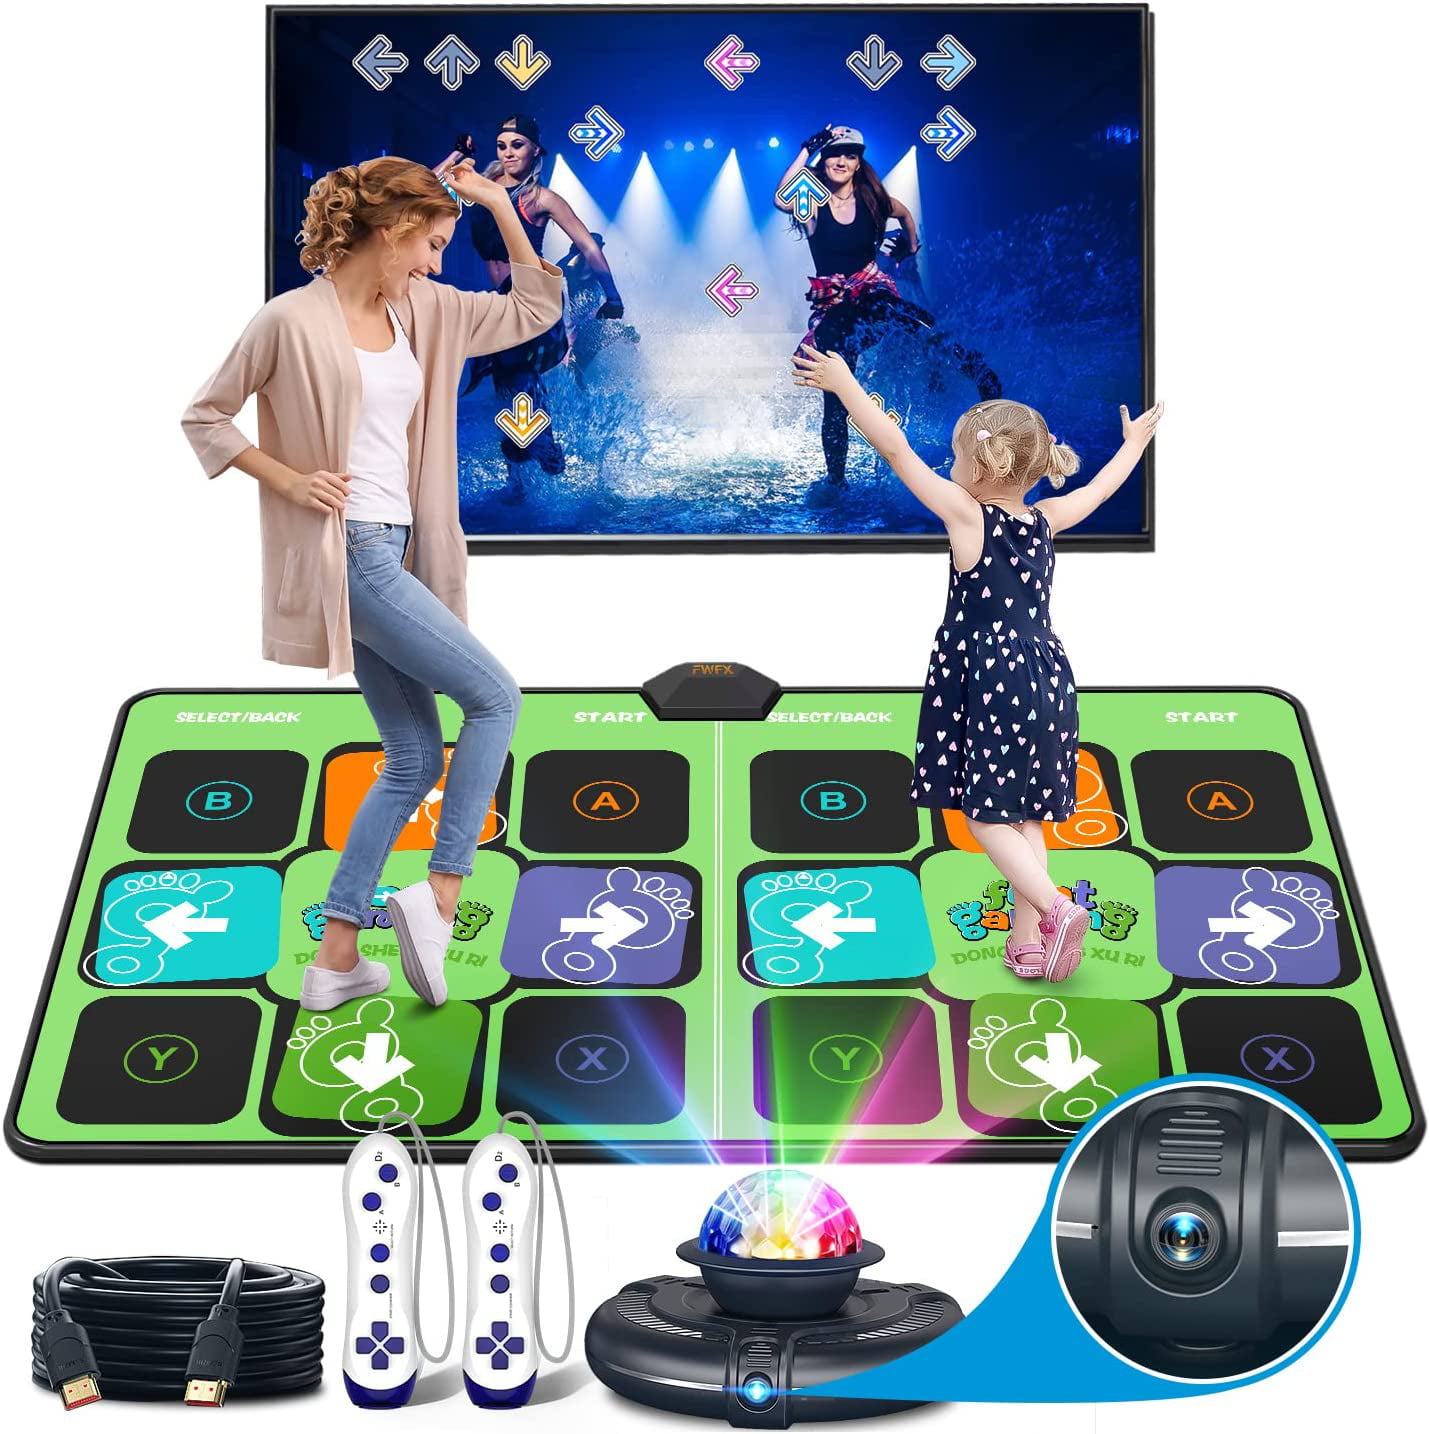 HD Camera Game Multi-Function Host Double User Yoga Dance Floor with Wireless Handle HDMI Interface for TV Non-Slip Dance Pad Dance Mat for Kids and Adults,Musical Electronic Dance mat 